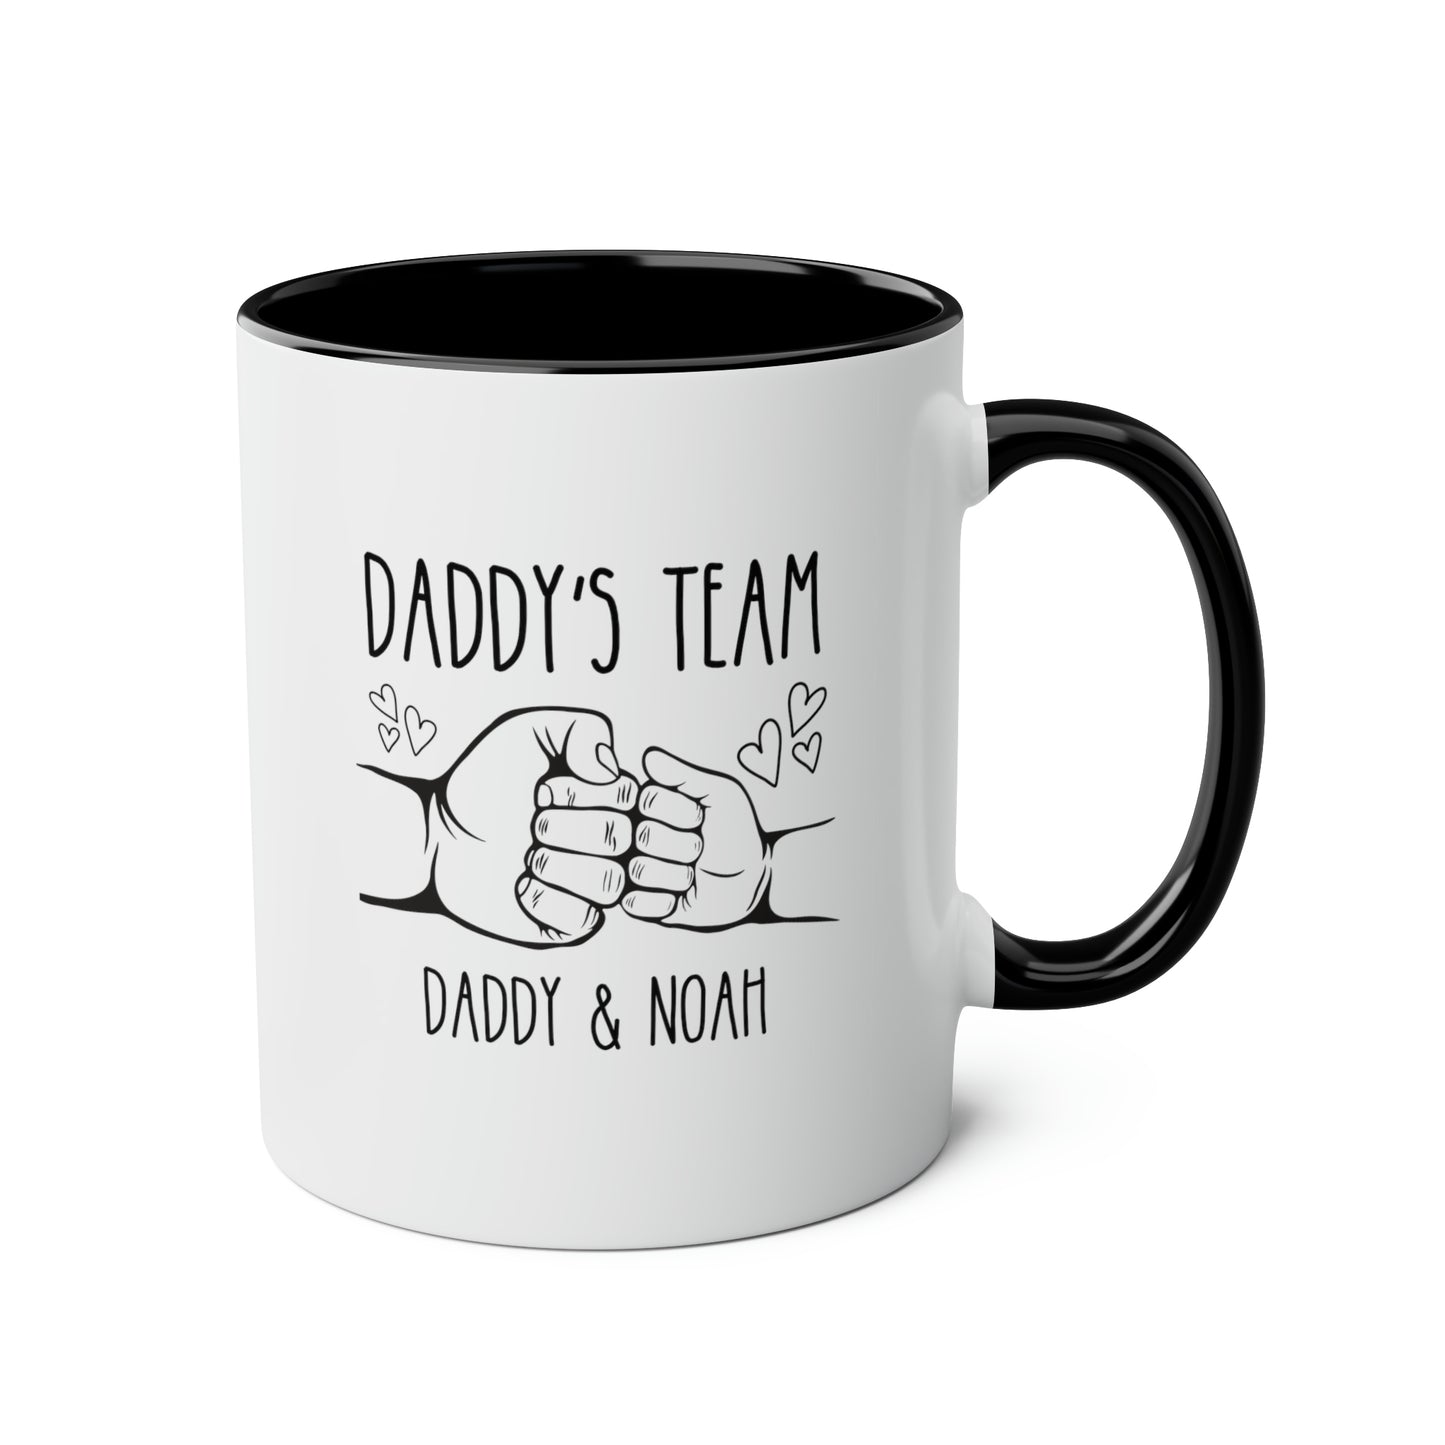 Daddy's Team 11oz white with black accent funny large coffee mug gift for dad father's day from kids name customize personalize grandfather fist bump hearts waveywares wavey wares wavywares wavy wares